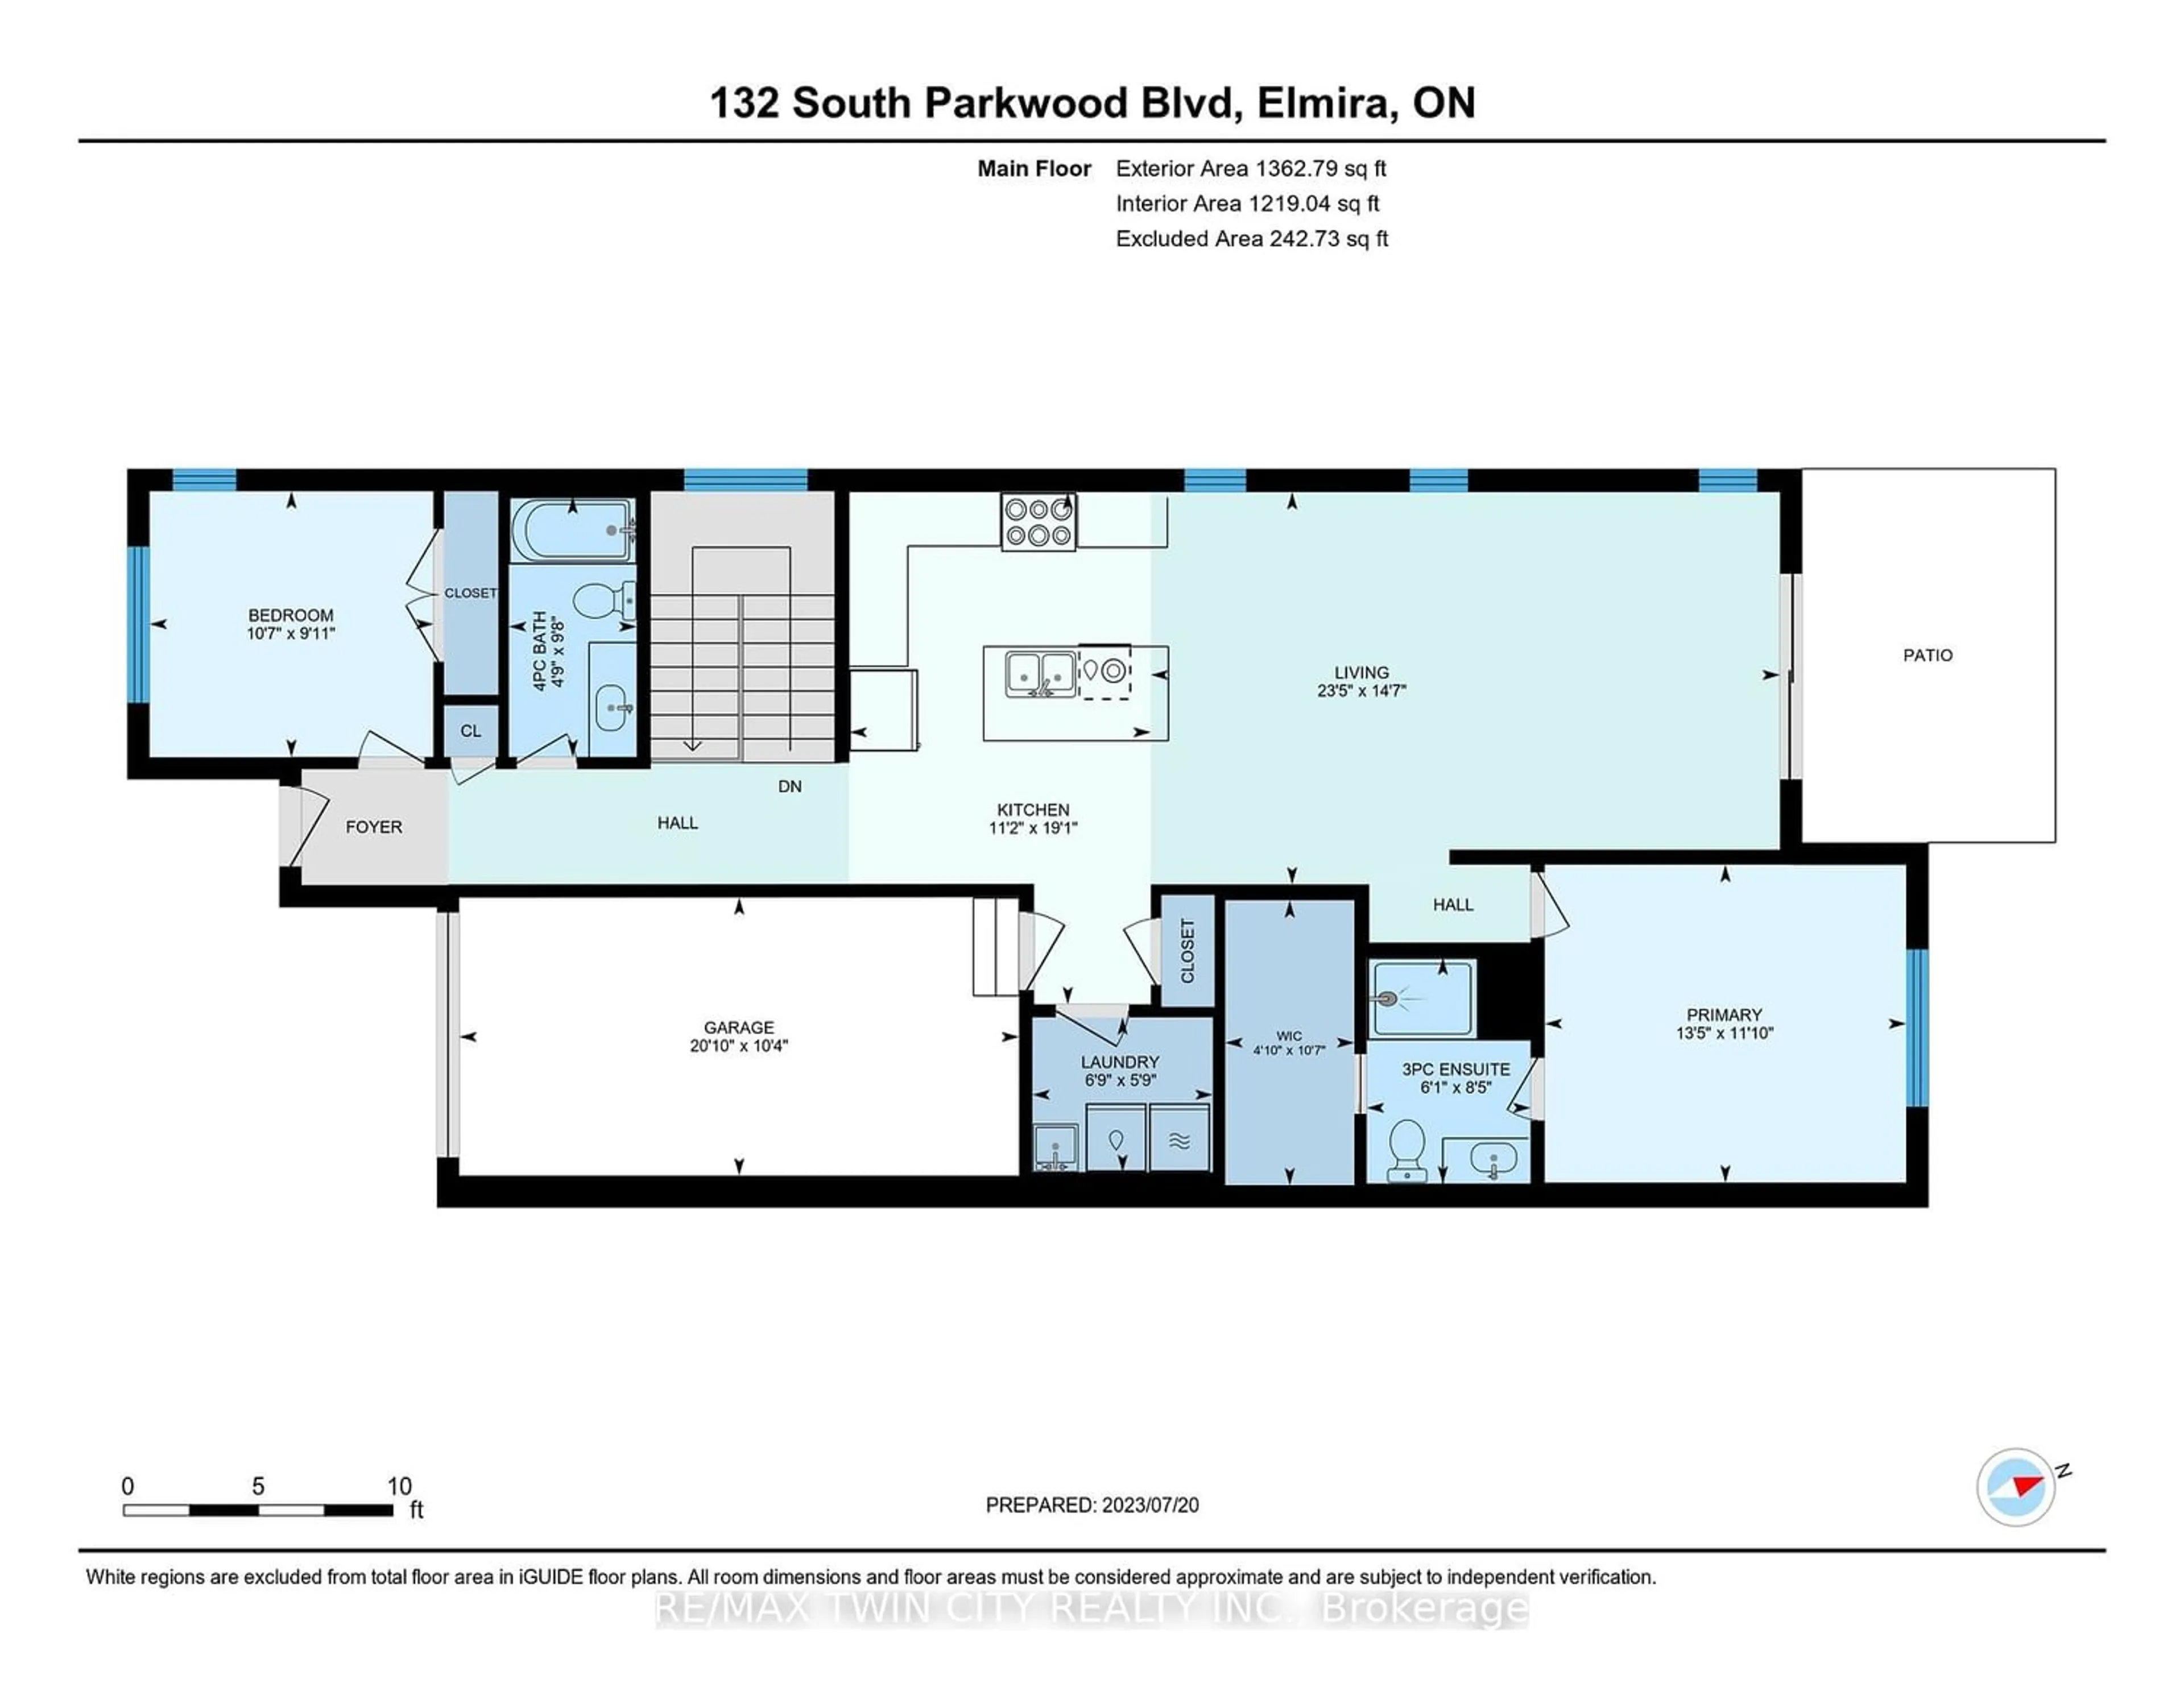 Floor plan for 132 South Parkwood Blvd, Woolwich Ontario N3M 0E6